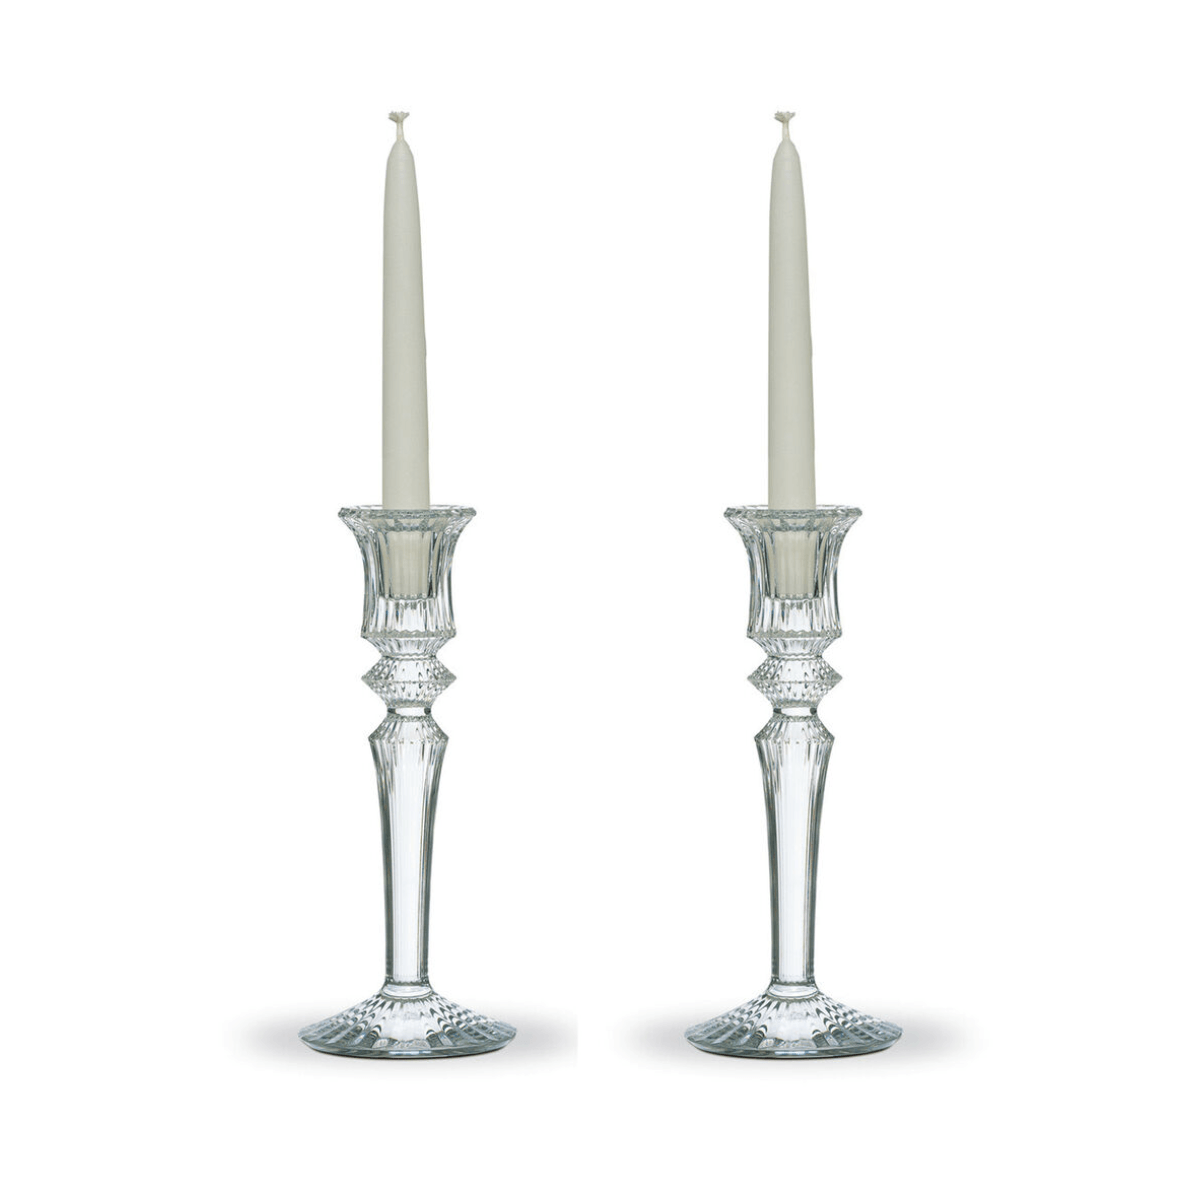 Baccarat Mille Nuits Candlesticks, pair